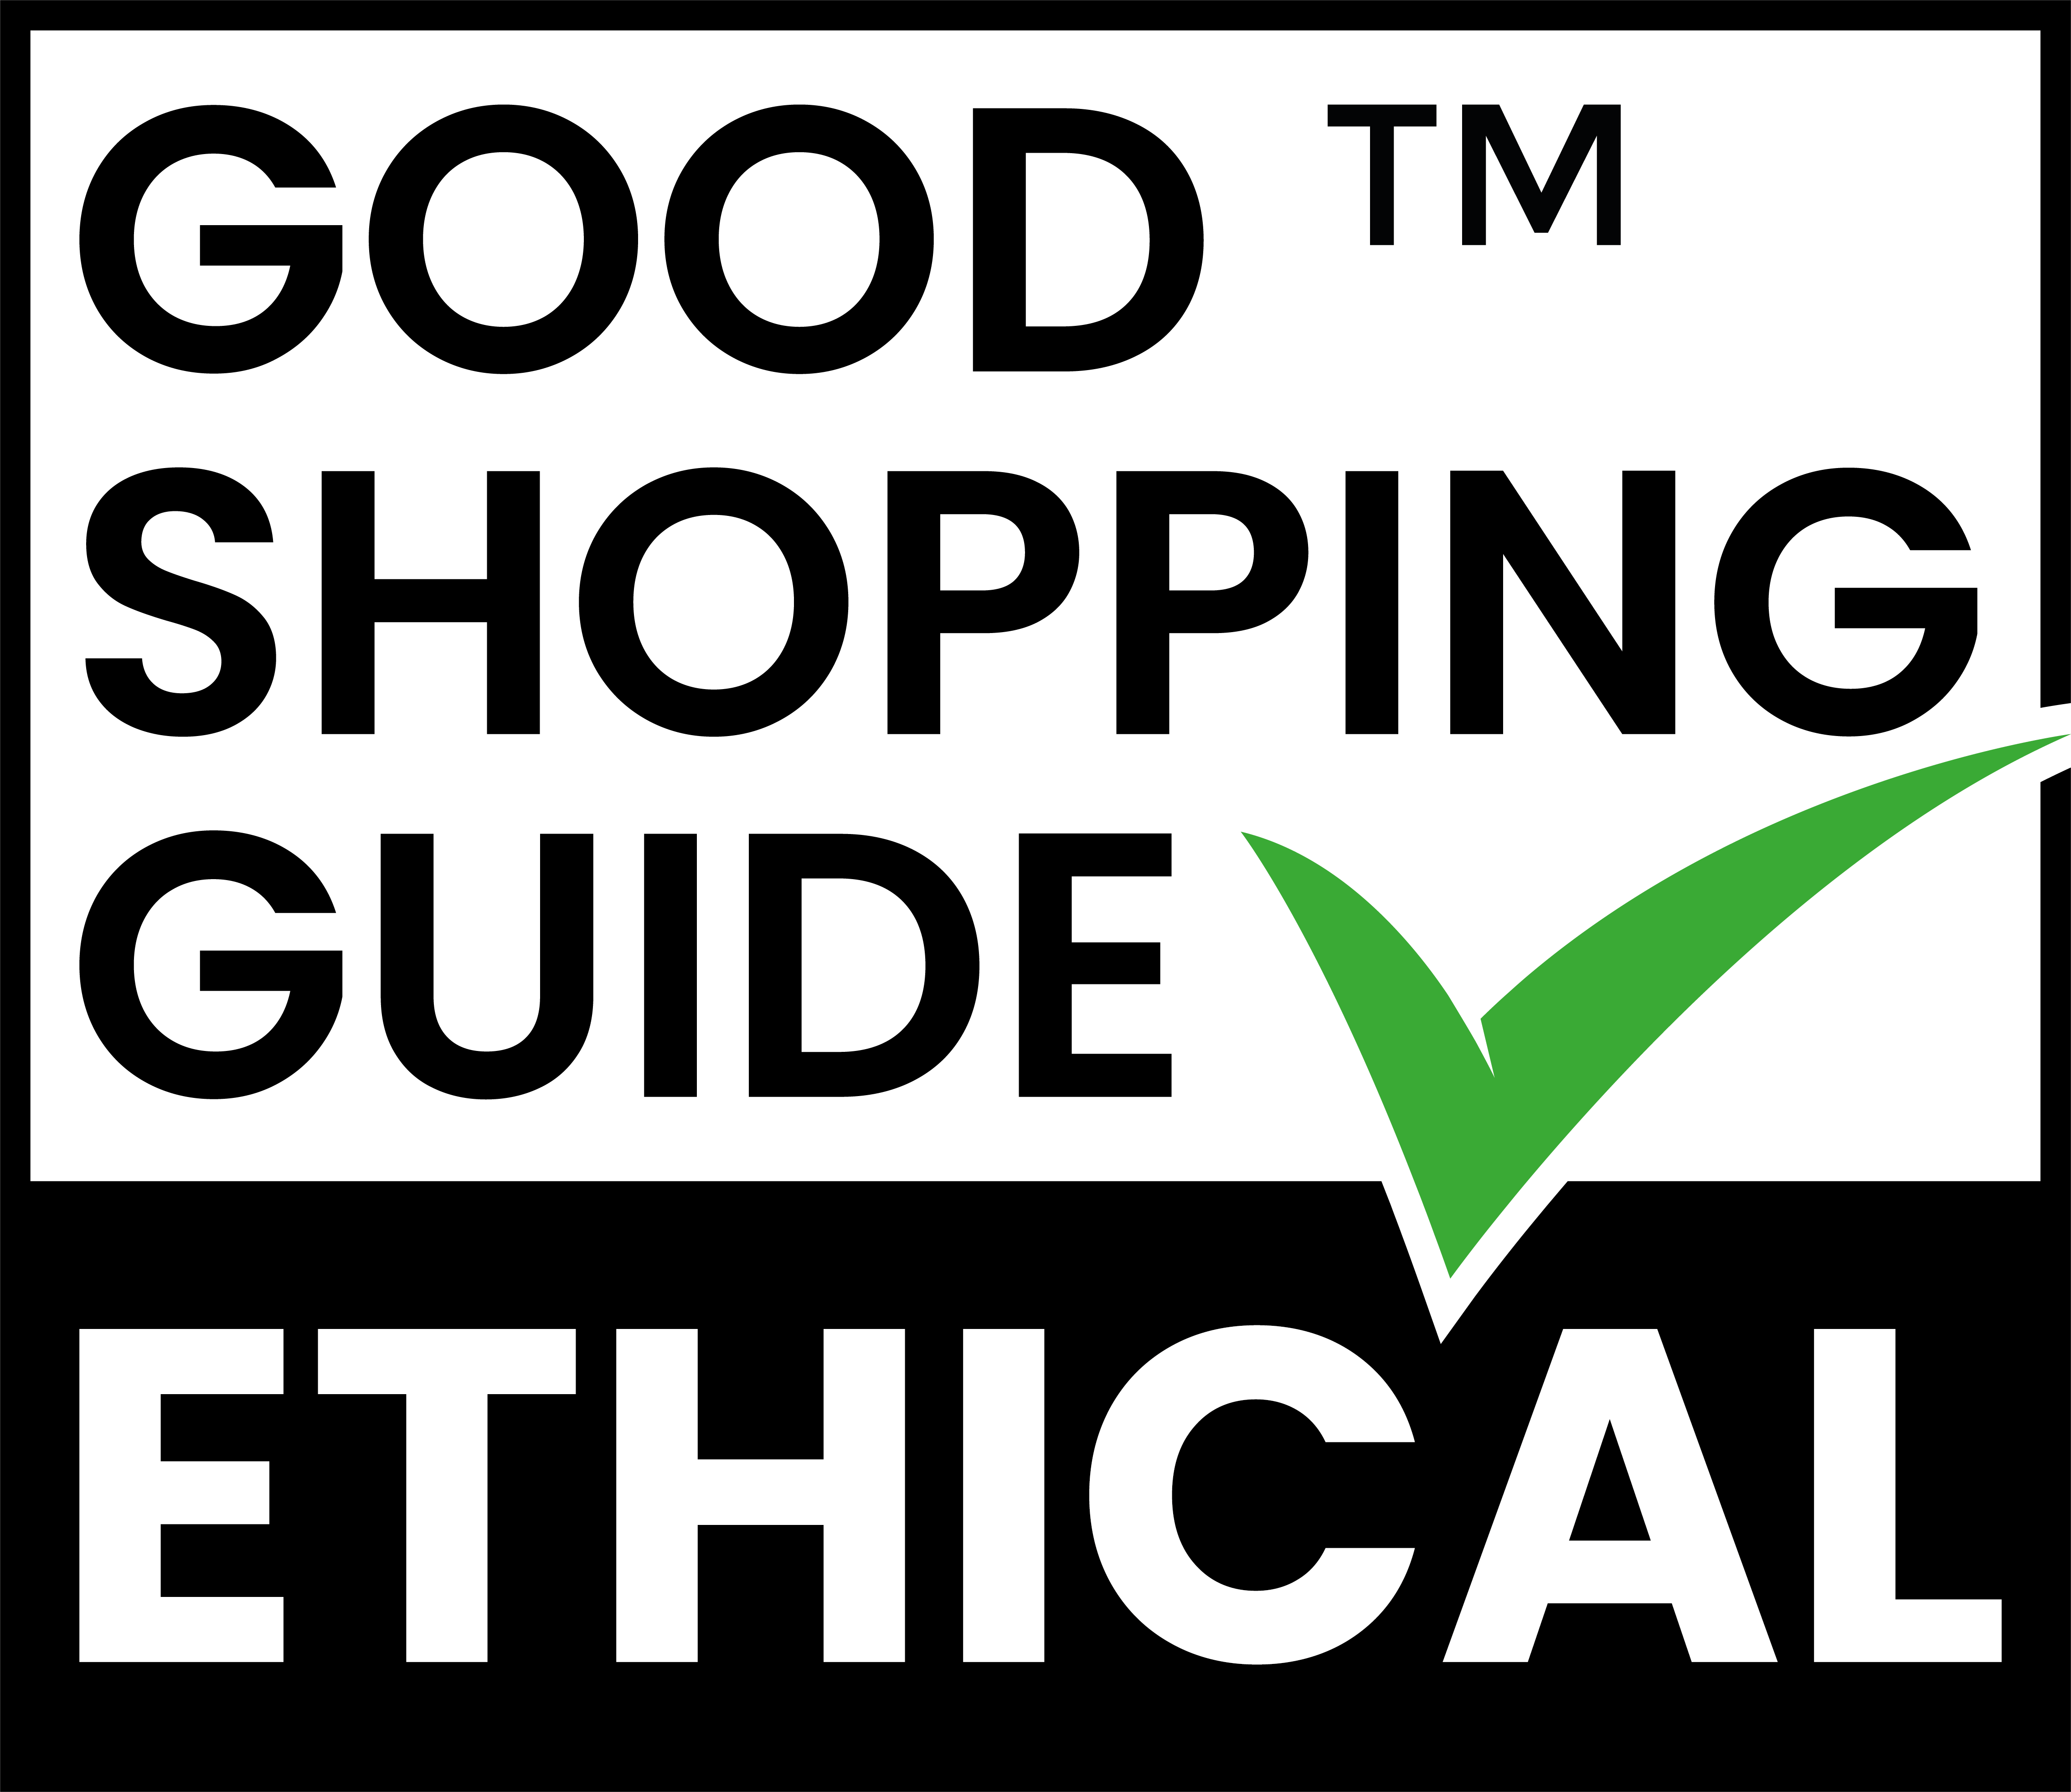 How ethical is John Lewis Plc?